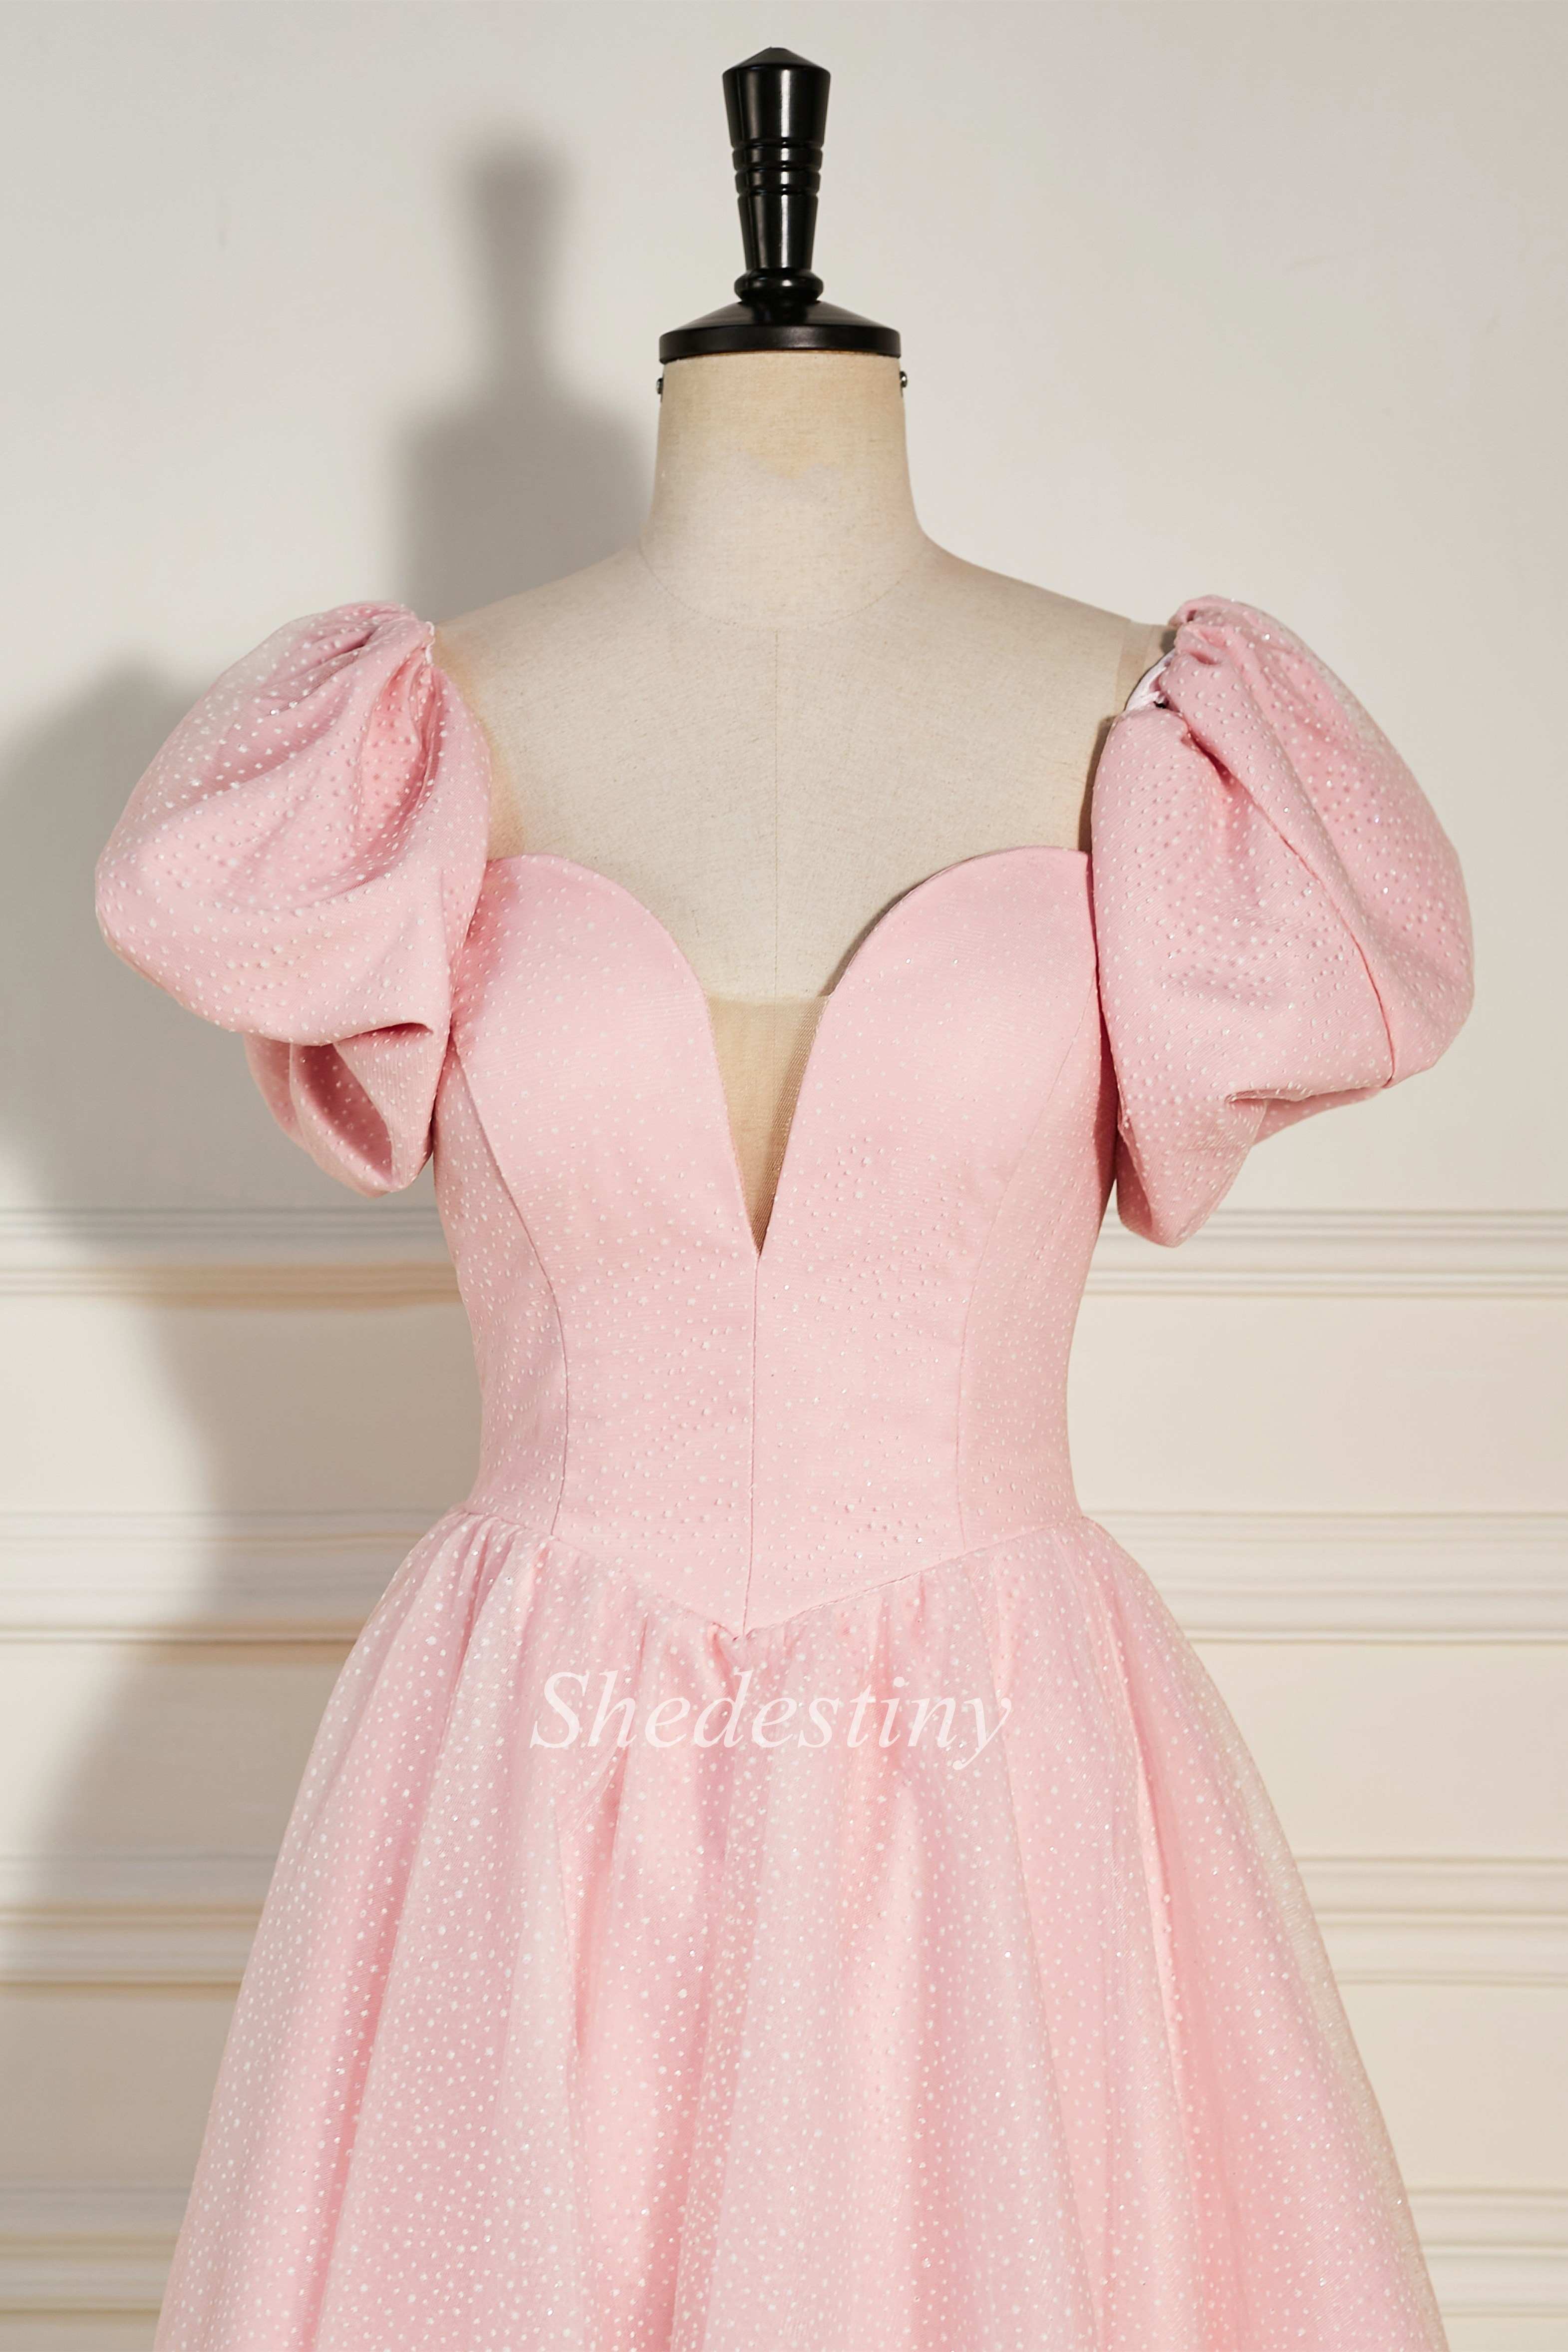 Pink Strapless Lace-Up Short Homecoming Dress with Puff Sleeves